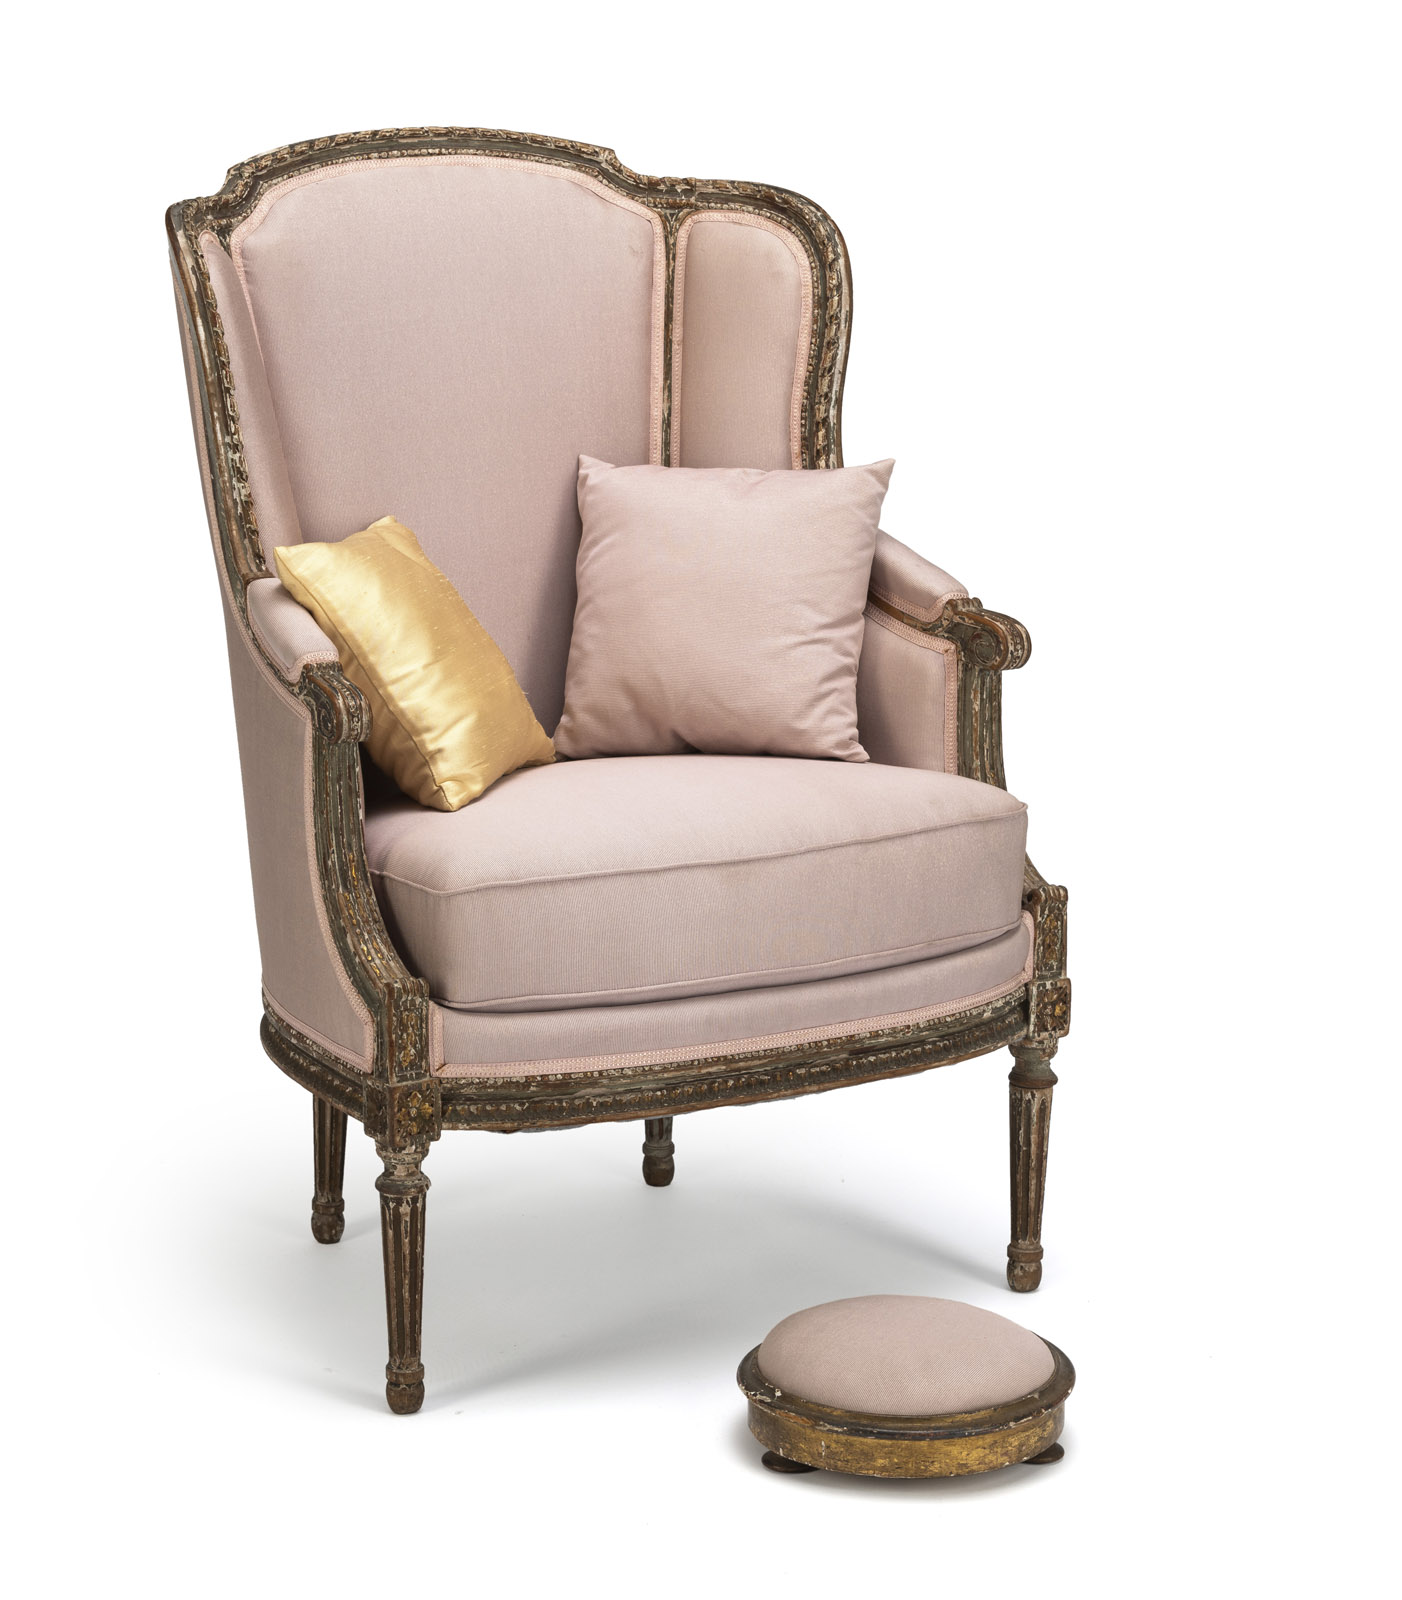 A LOUIS XVI STYLE POLYCHROME AND PARCEL- GILT PAINTED FAUTEUIL